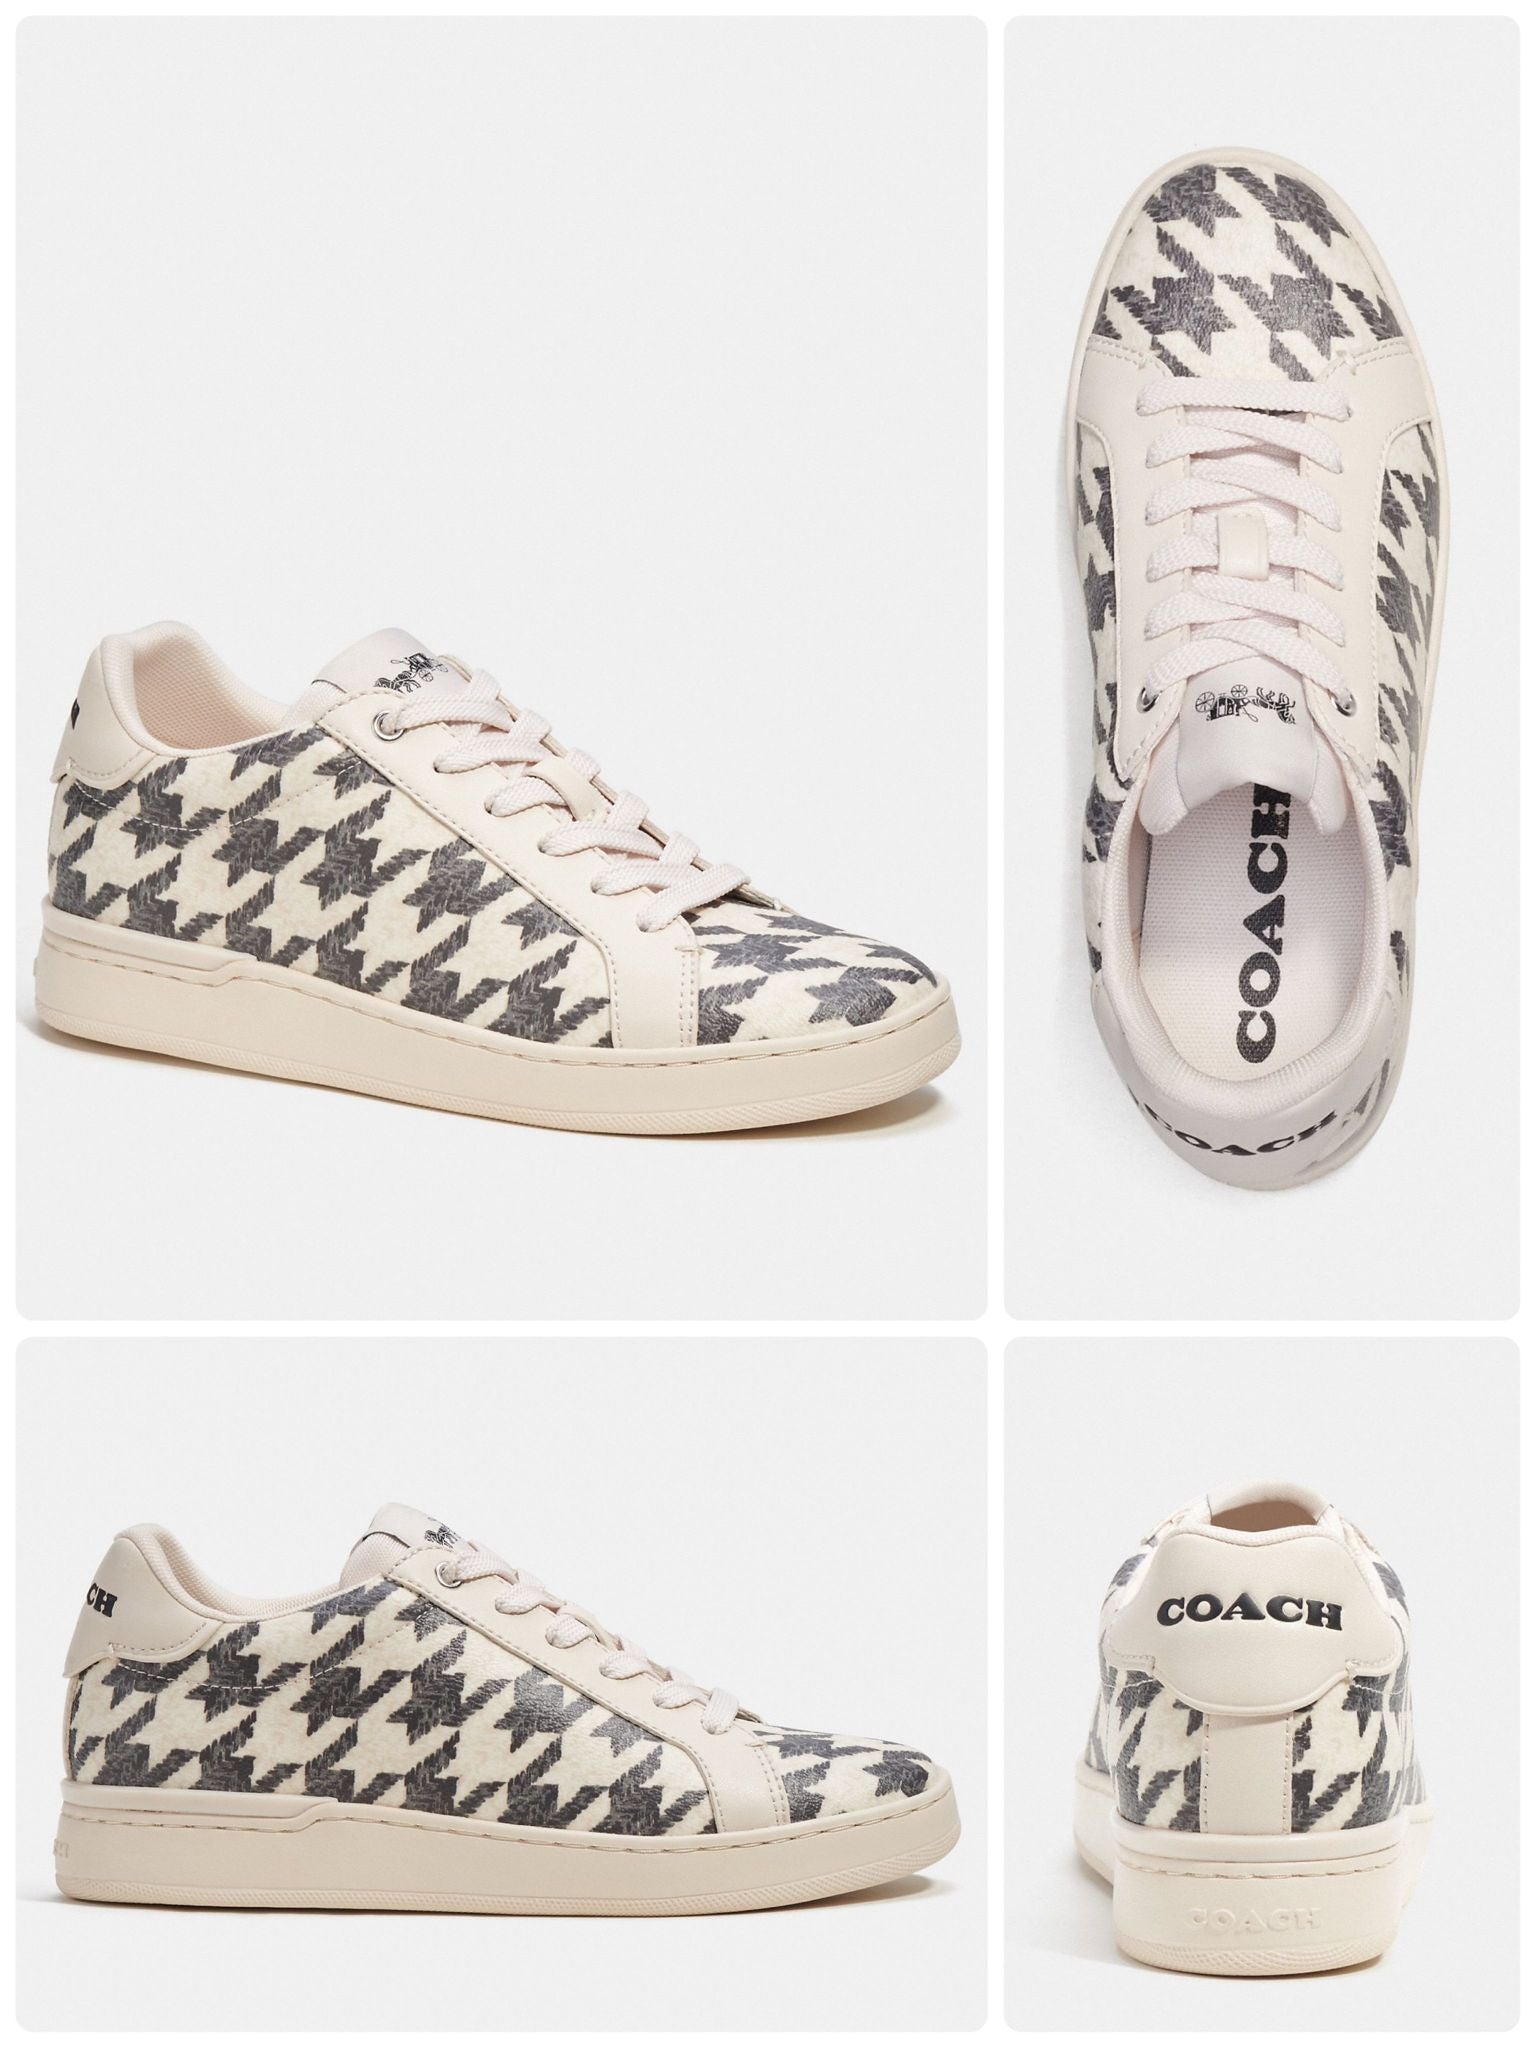 Coach Clip Low Top Sneaker With Houndstooth Print